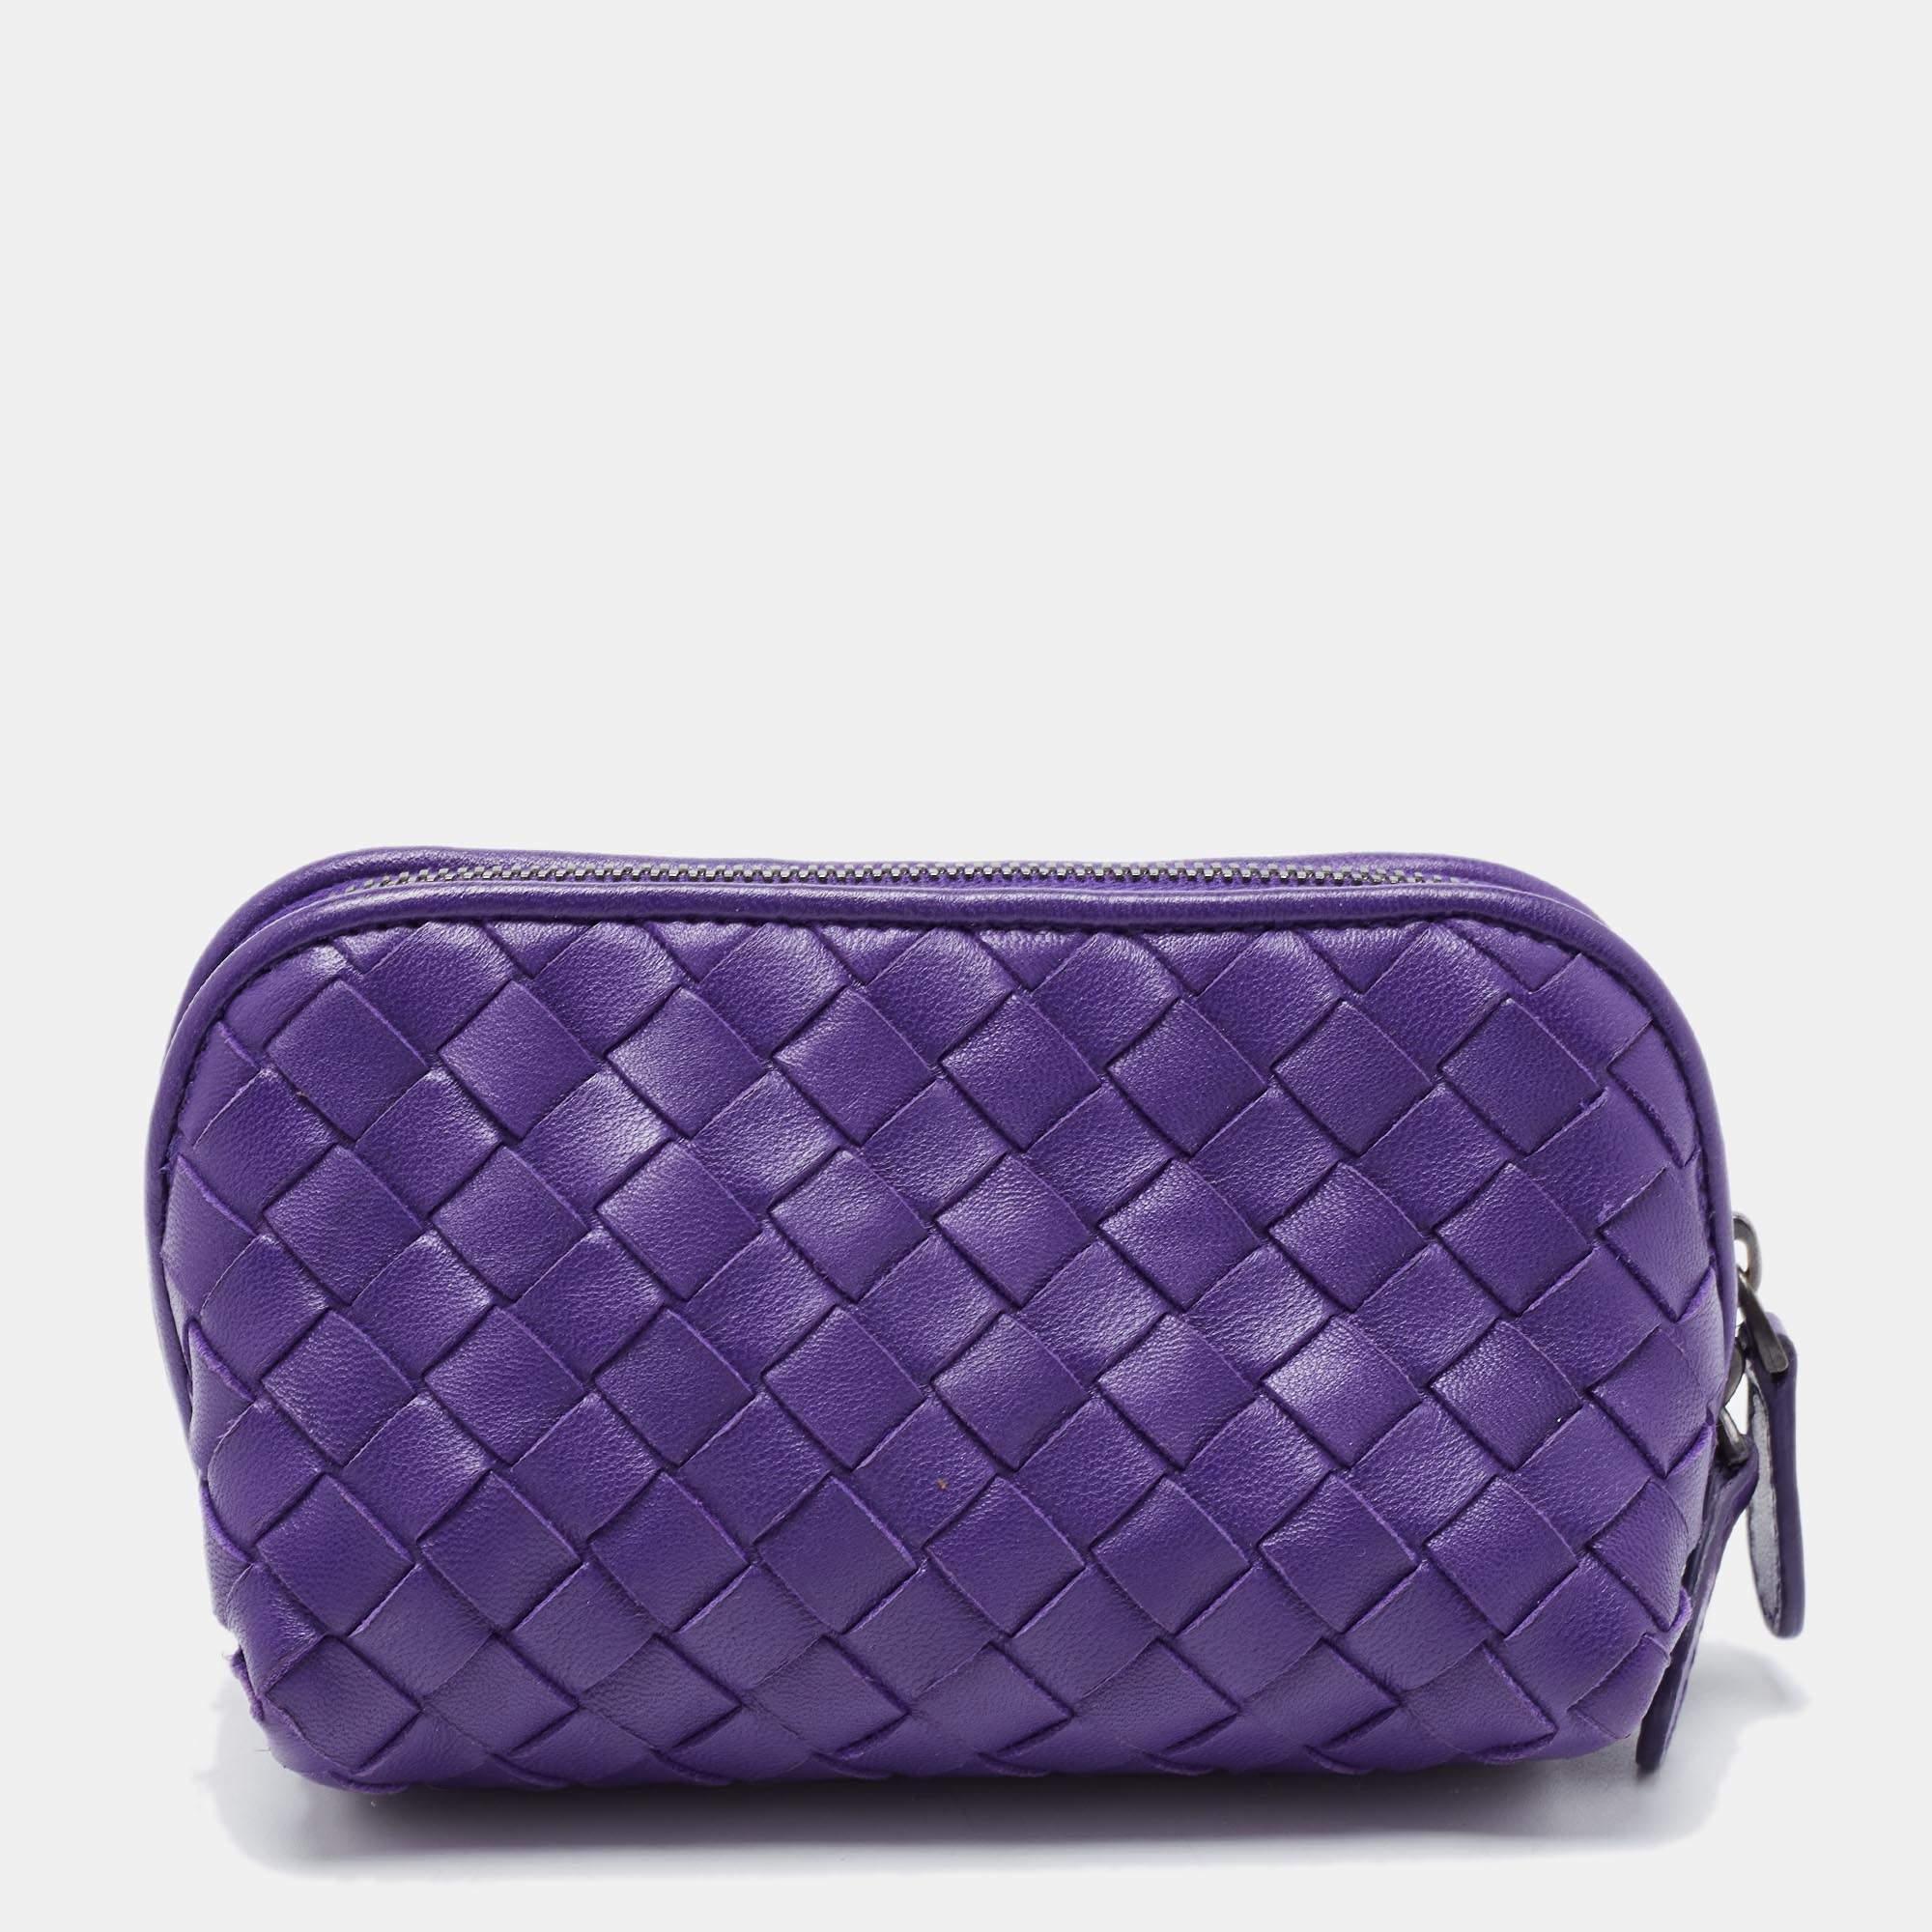 This Bottega Veneta purse is carefully crafted to offer you a luxurious accessory you will cherish. It is marked by high quality and enduring appeal. Invest in it today!

